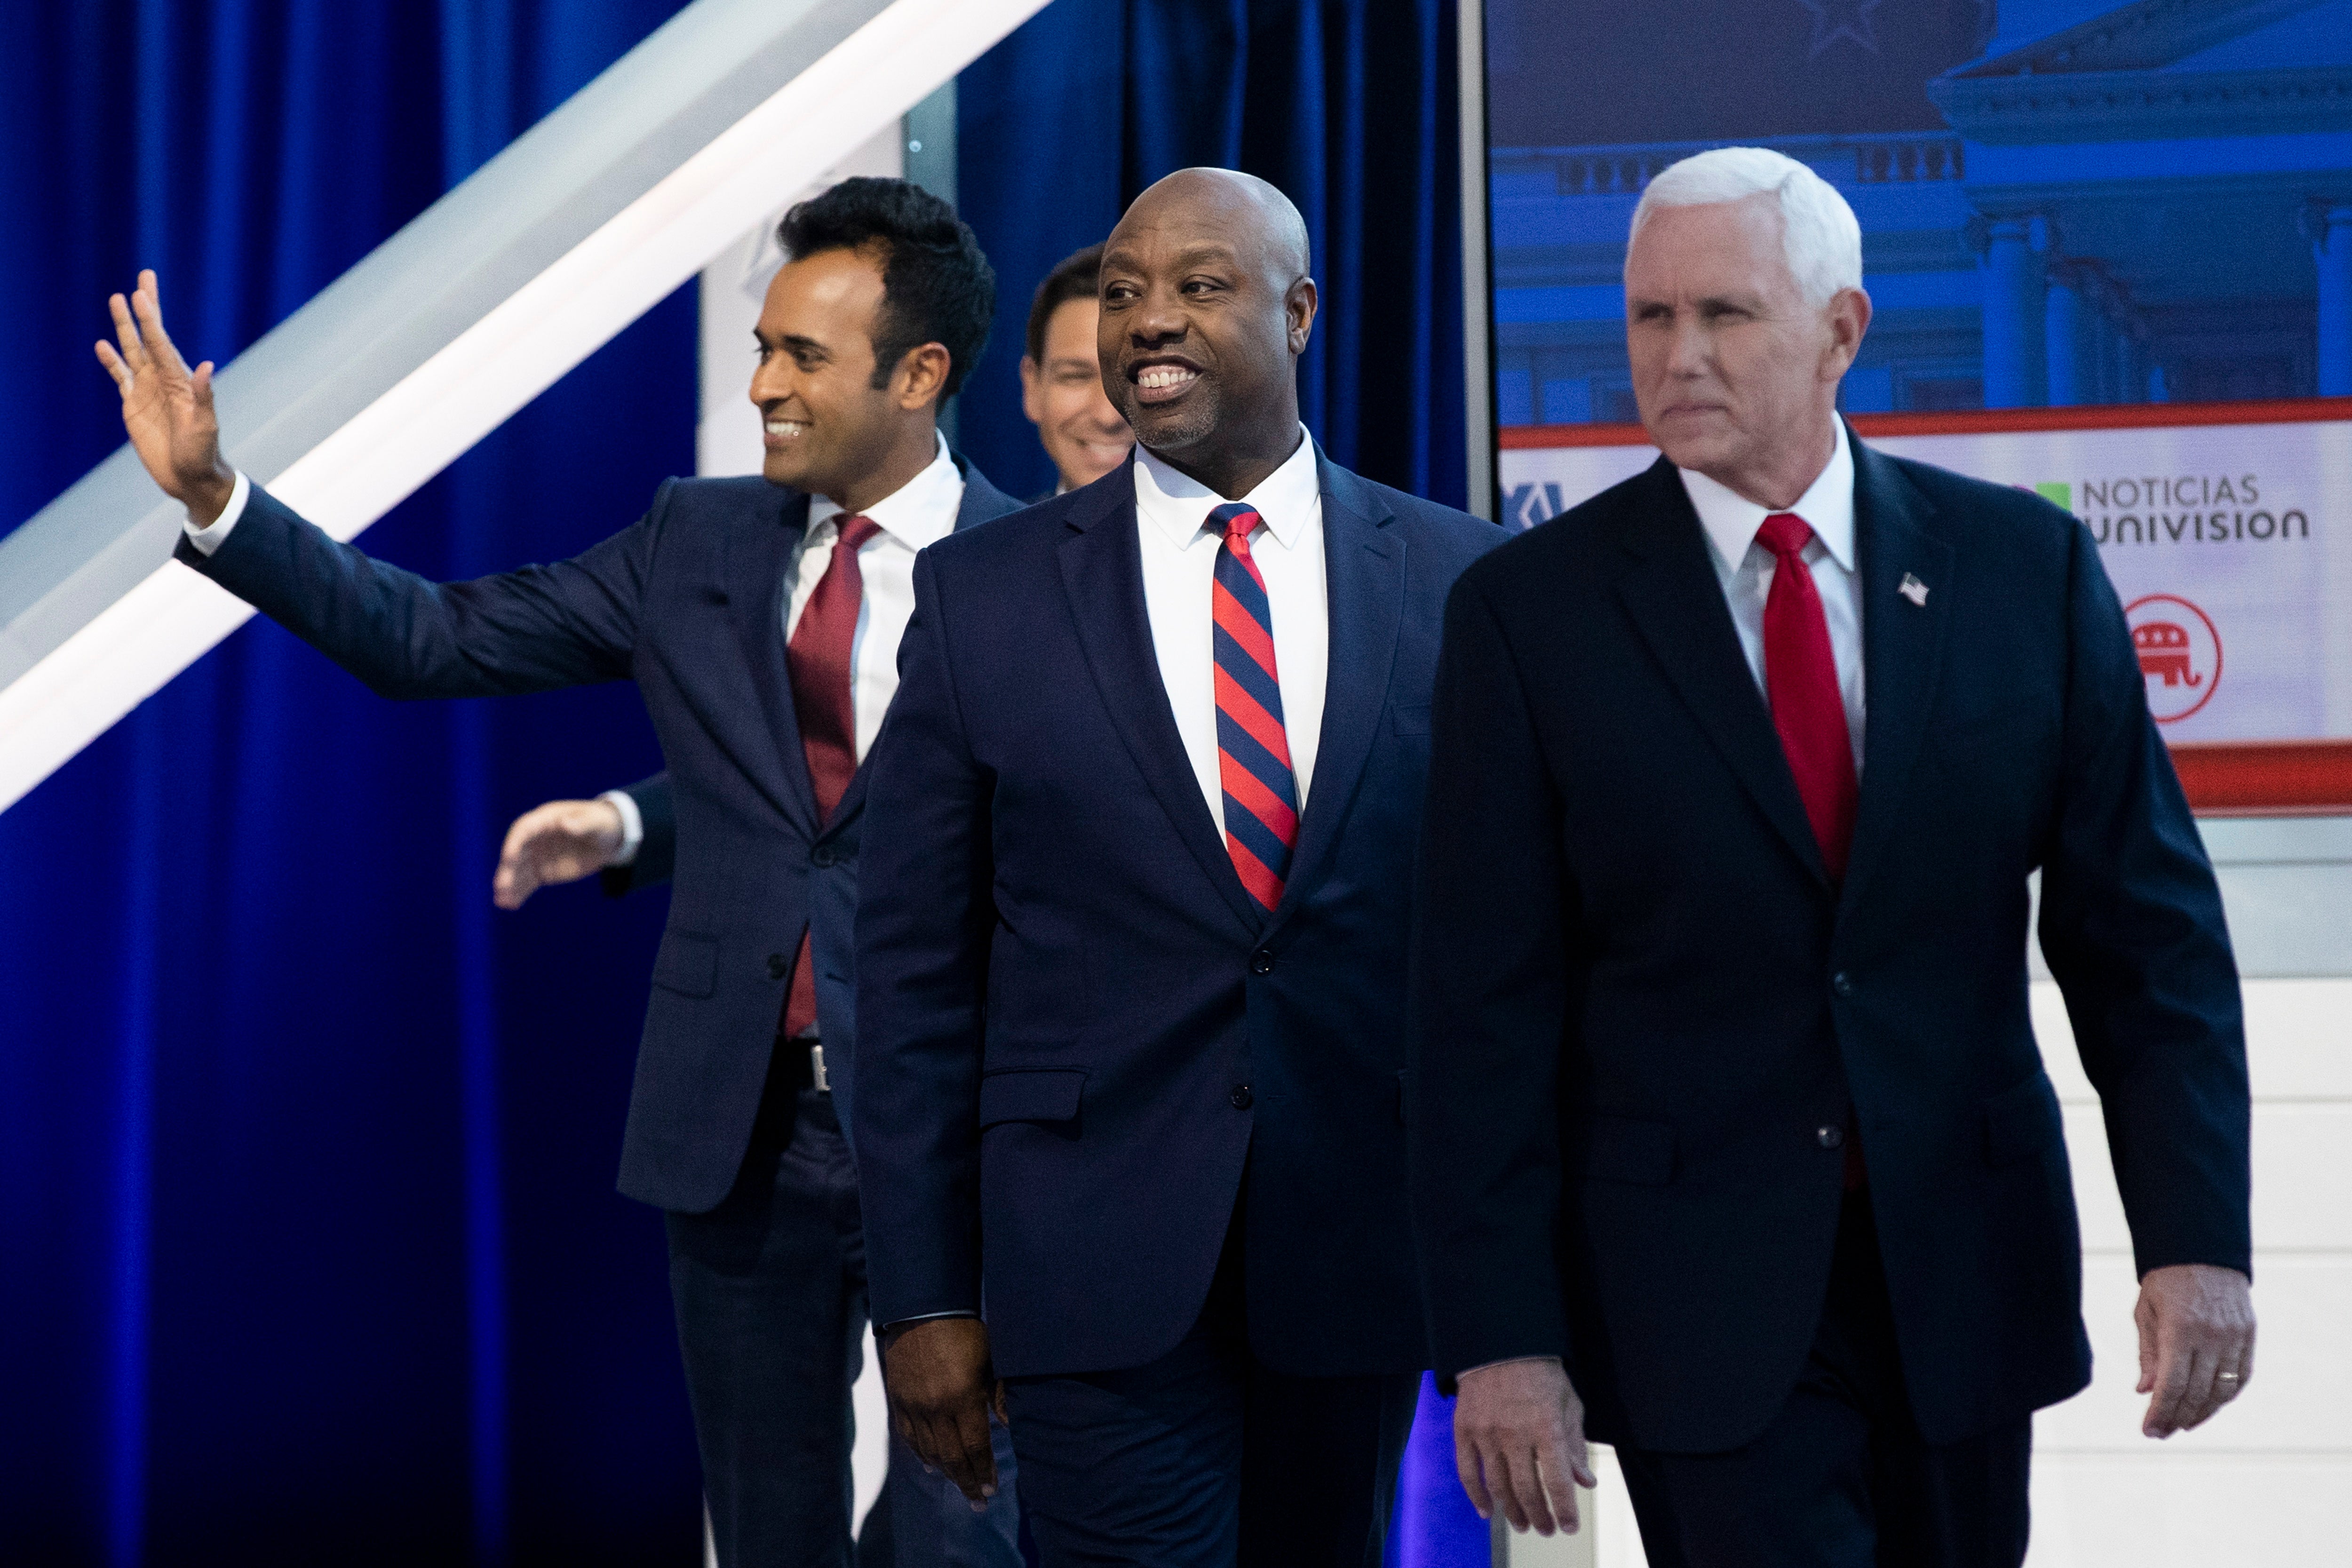 US entrepreneur Vivek Ramaswamy, South Carolina senator Tim Scott and former Vice President Mike Pence arrive on stage prior to the GOP FOX Business Presidential Debate at the Ronald Reagan Presidential Library in Simi Valley, California, USA, 27 September 2023